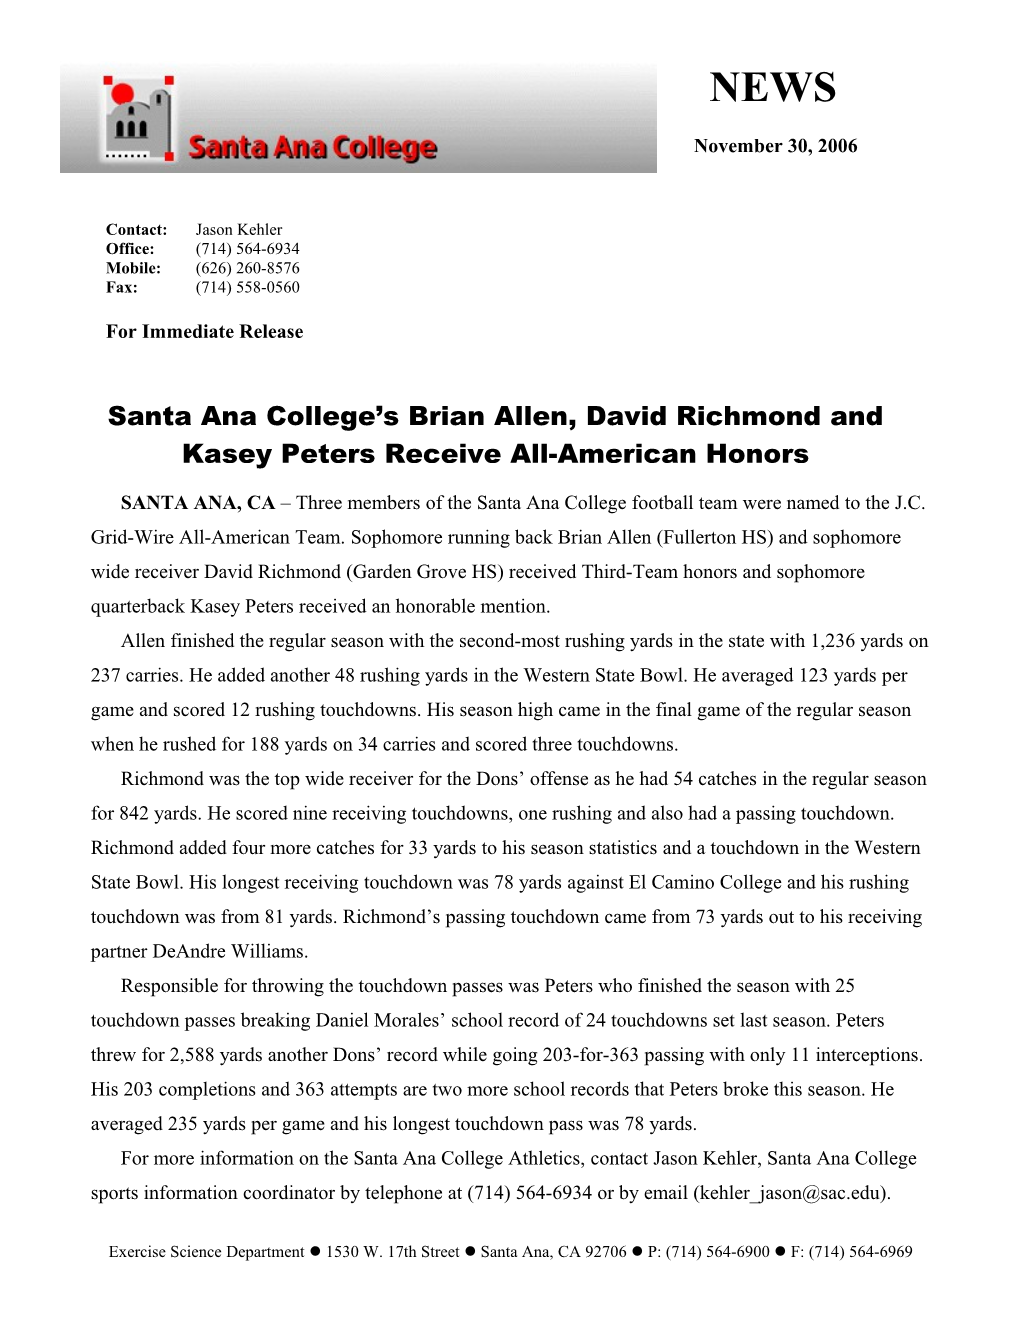 Santa Ana College S Brian Allen, David Richmond and Kasey Peters Receive All-American Honors